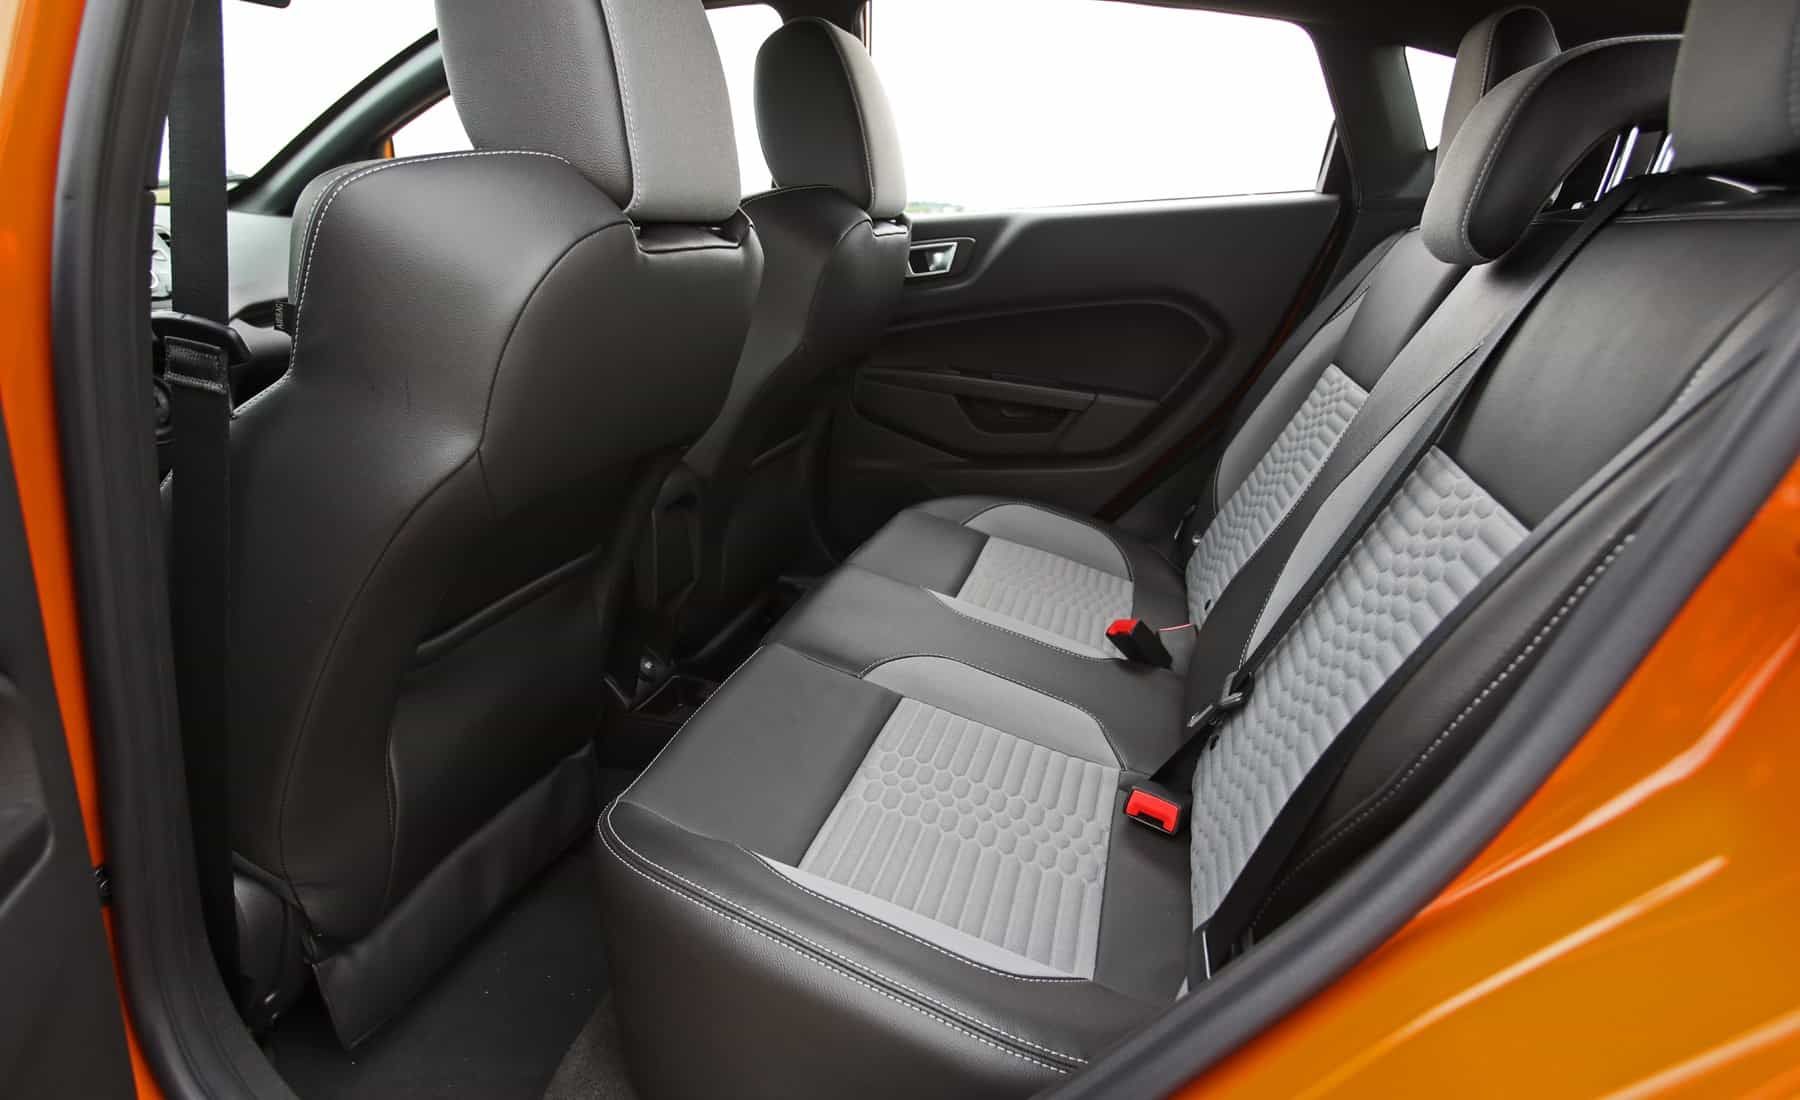 2017 Ford Fiesta St Interior Seats Rear (View 25 of 47)